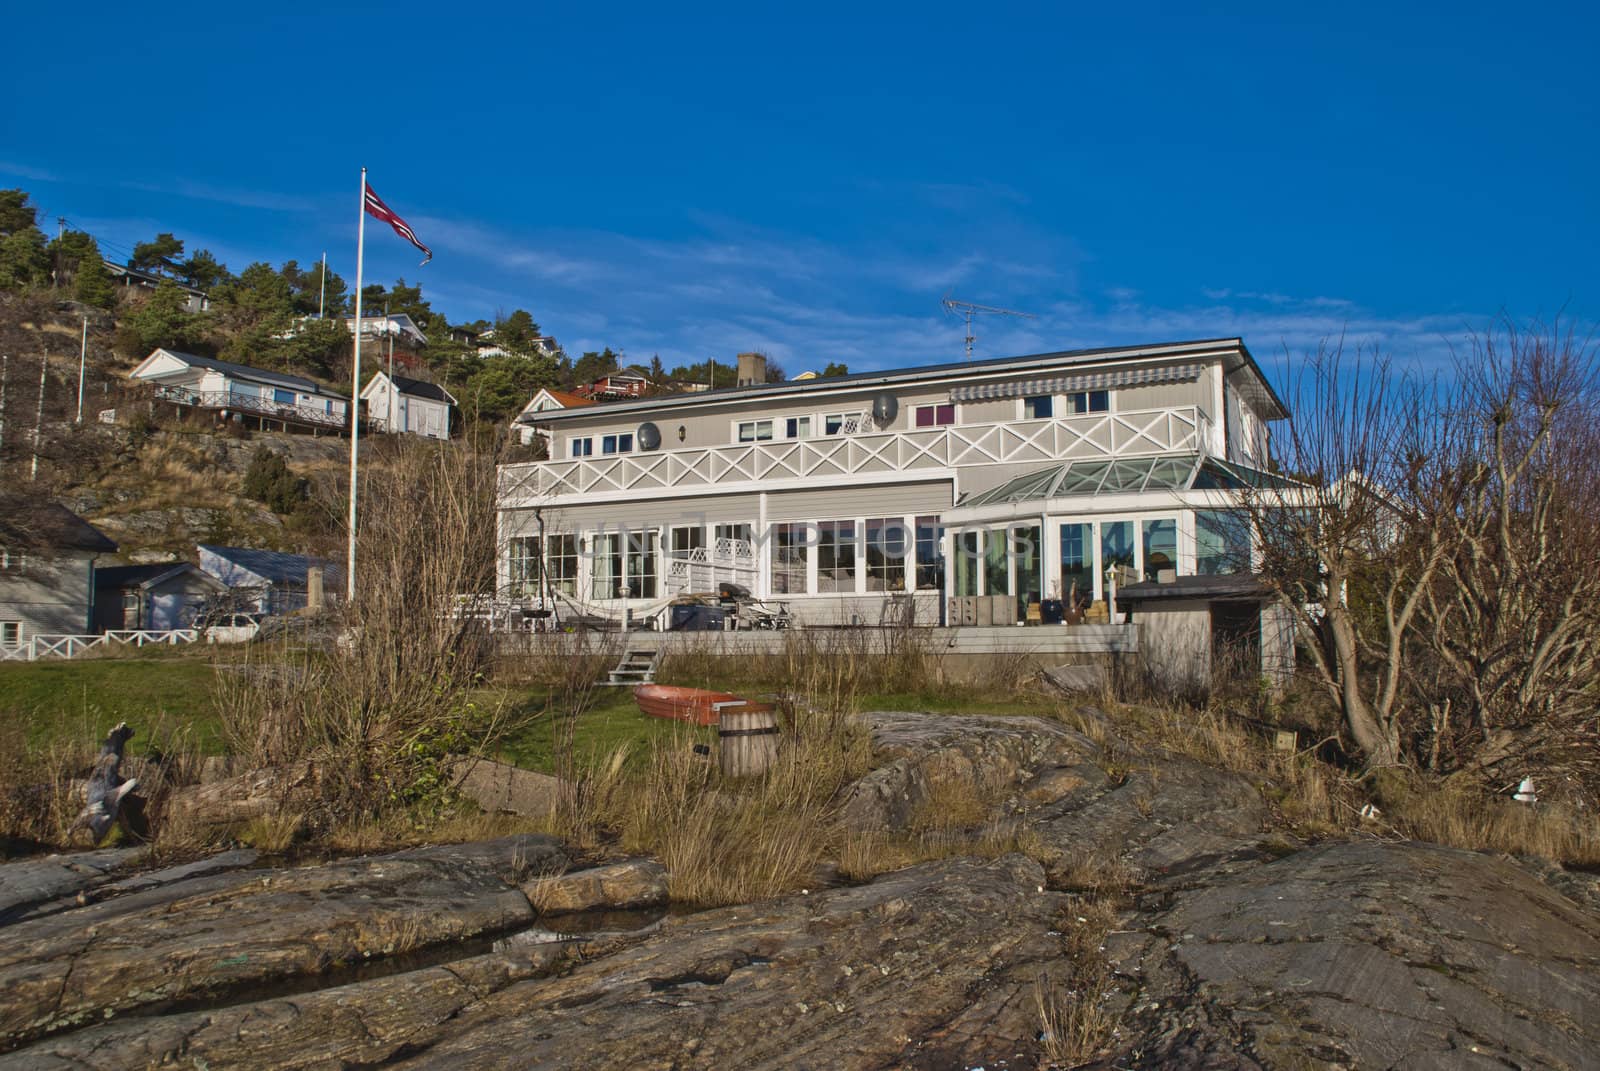 in the past this was a hotel and restaurant but is now privately owned, svalerødkilen is located in halden municipality and is a popular recreation area by locals in the summer with swimming, outdoor recreation, fishing, and boating. picture is shot in november 2012